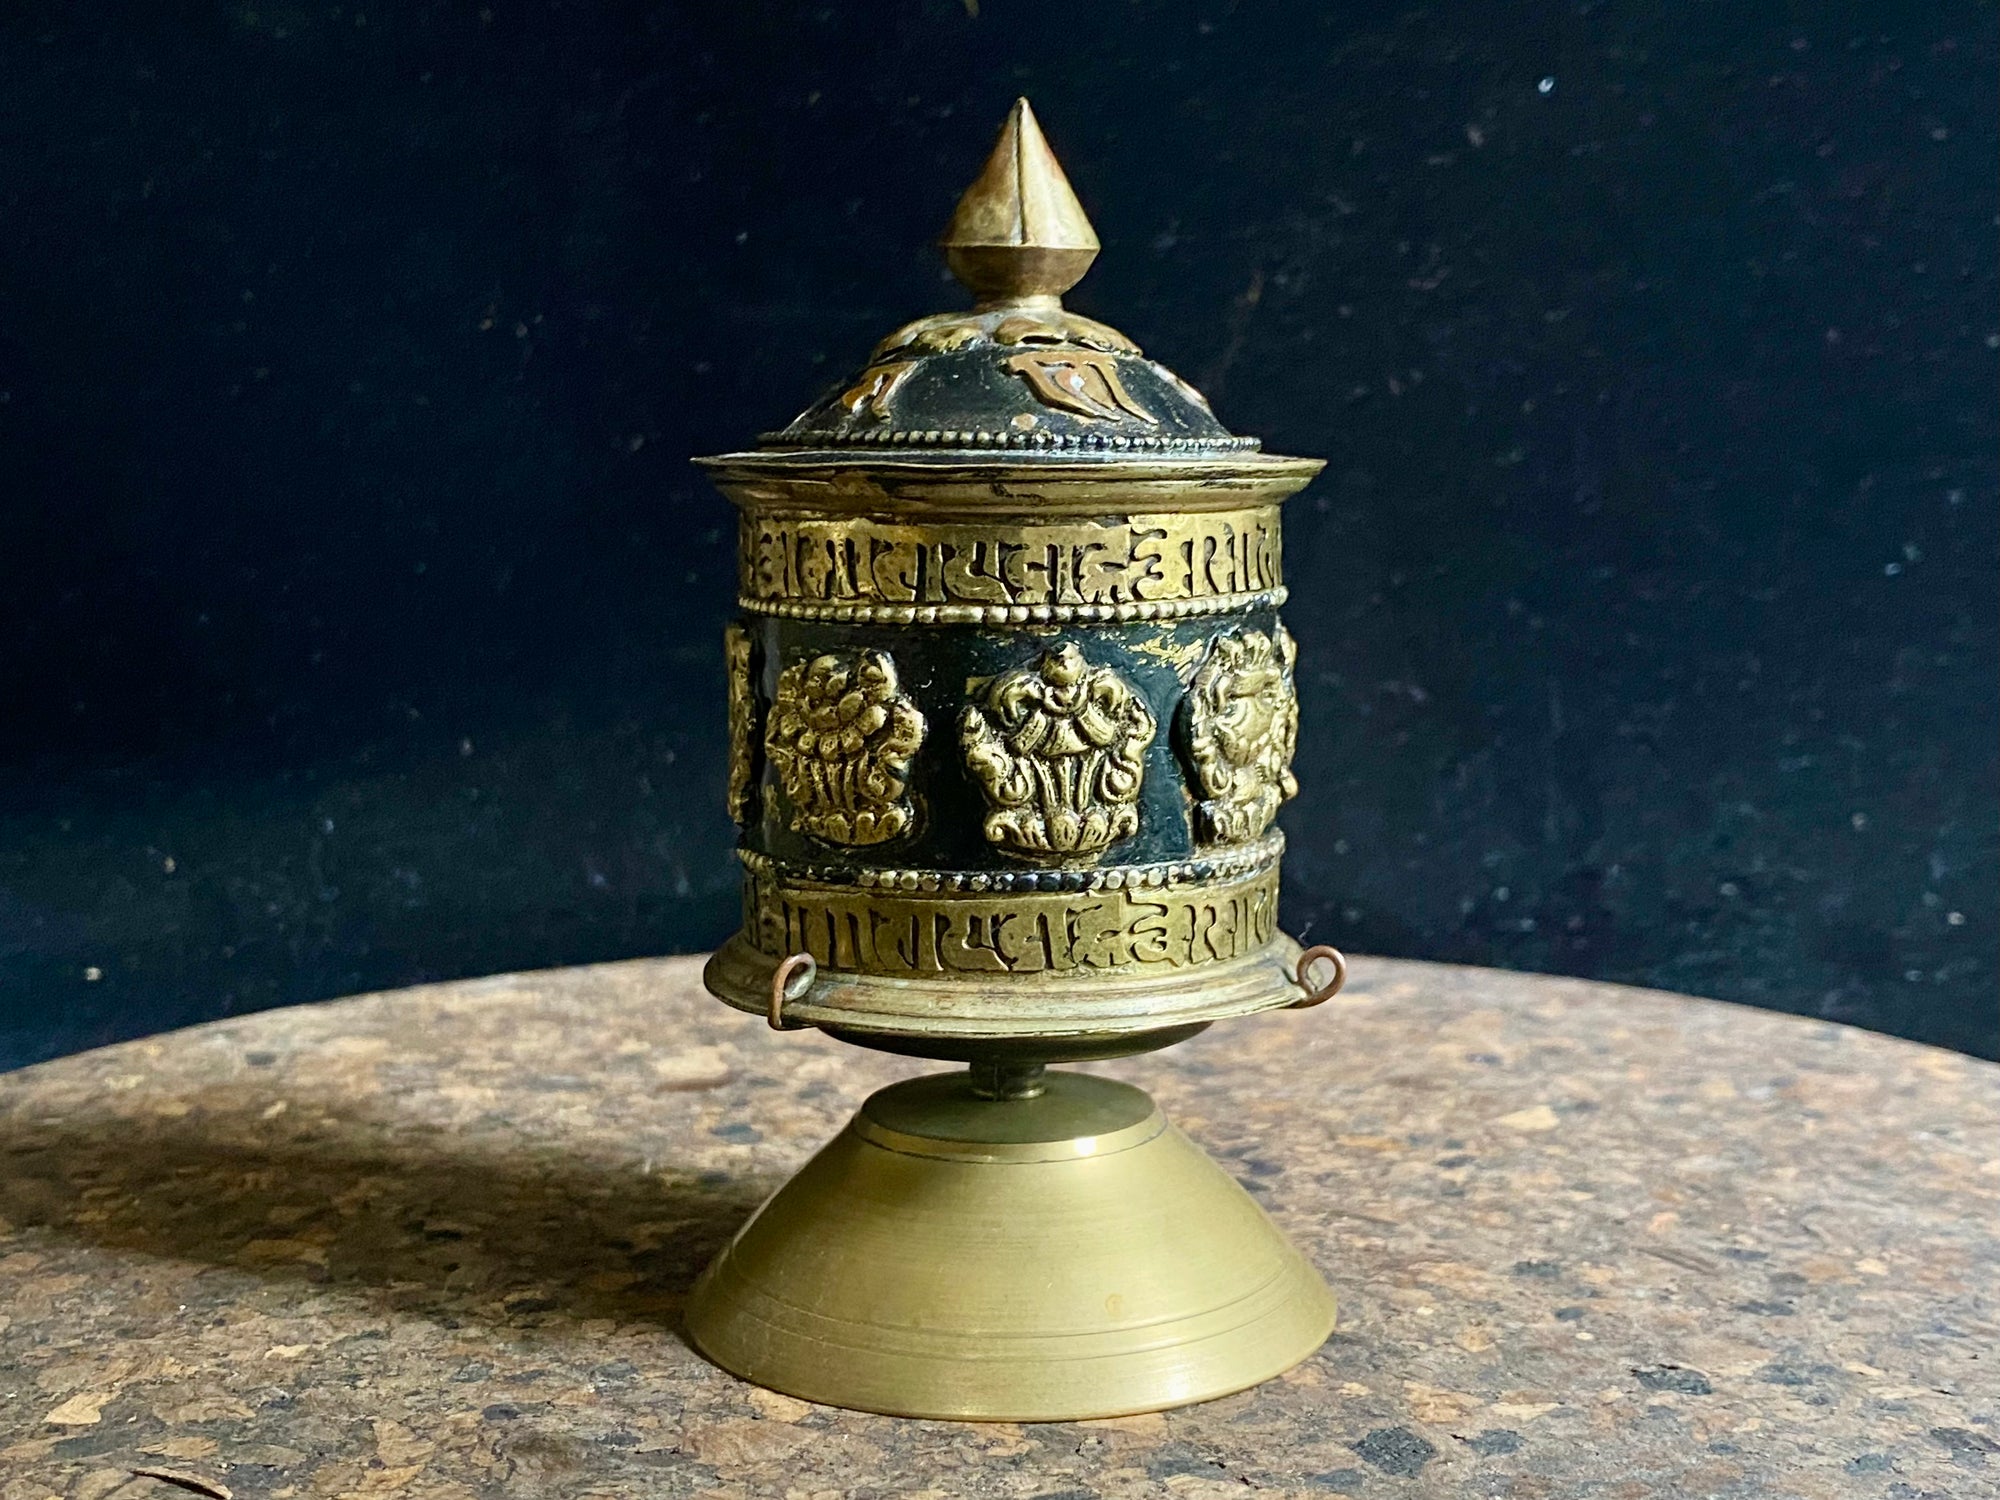 Standing prayer wheel, copper and brass, weighted for spinning and containing a scroll on which is printed the mantra "Om Mani Padme Hum", a prayer to the Compassionate Buddha, printed many times over. Measurements: height 12 cm, diameter 6.3 cm